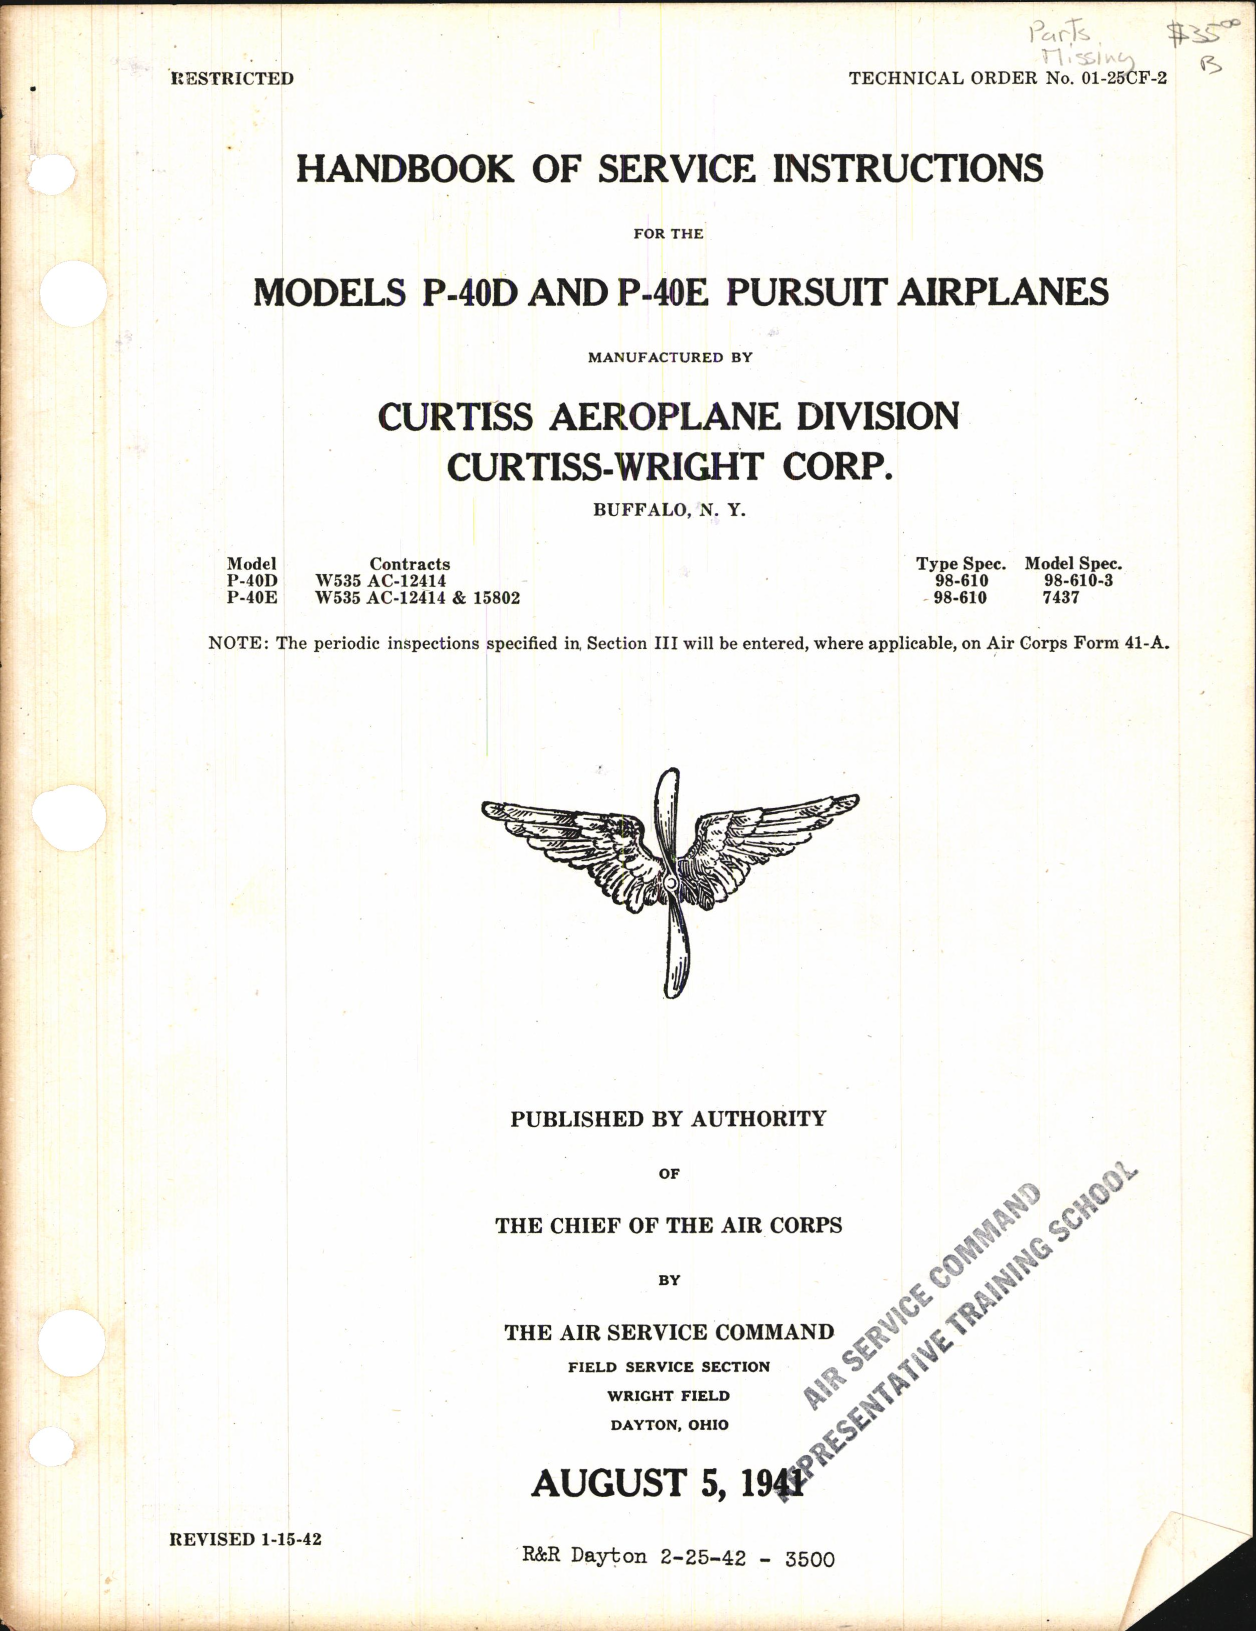 Sample page 1 from AirCorps Library document: Service Instructions for Models P-40D and P-40E Pursuit Airplanes